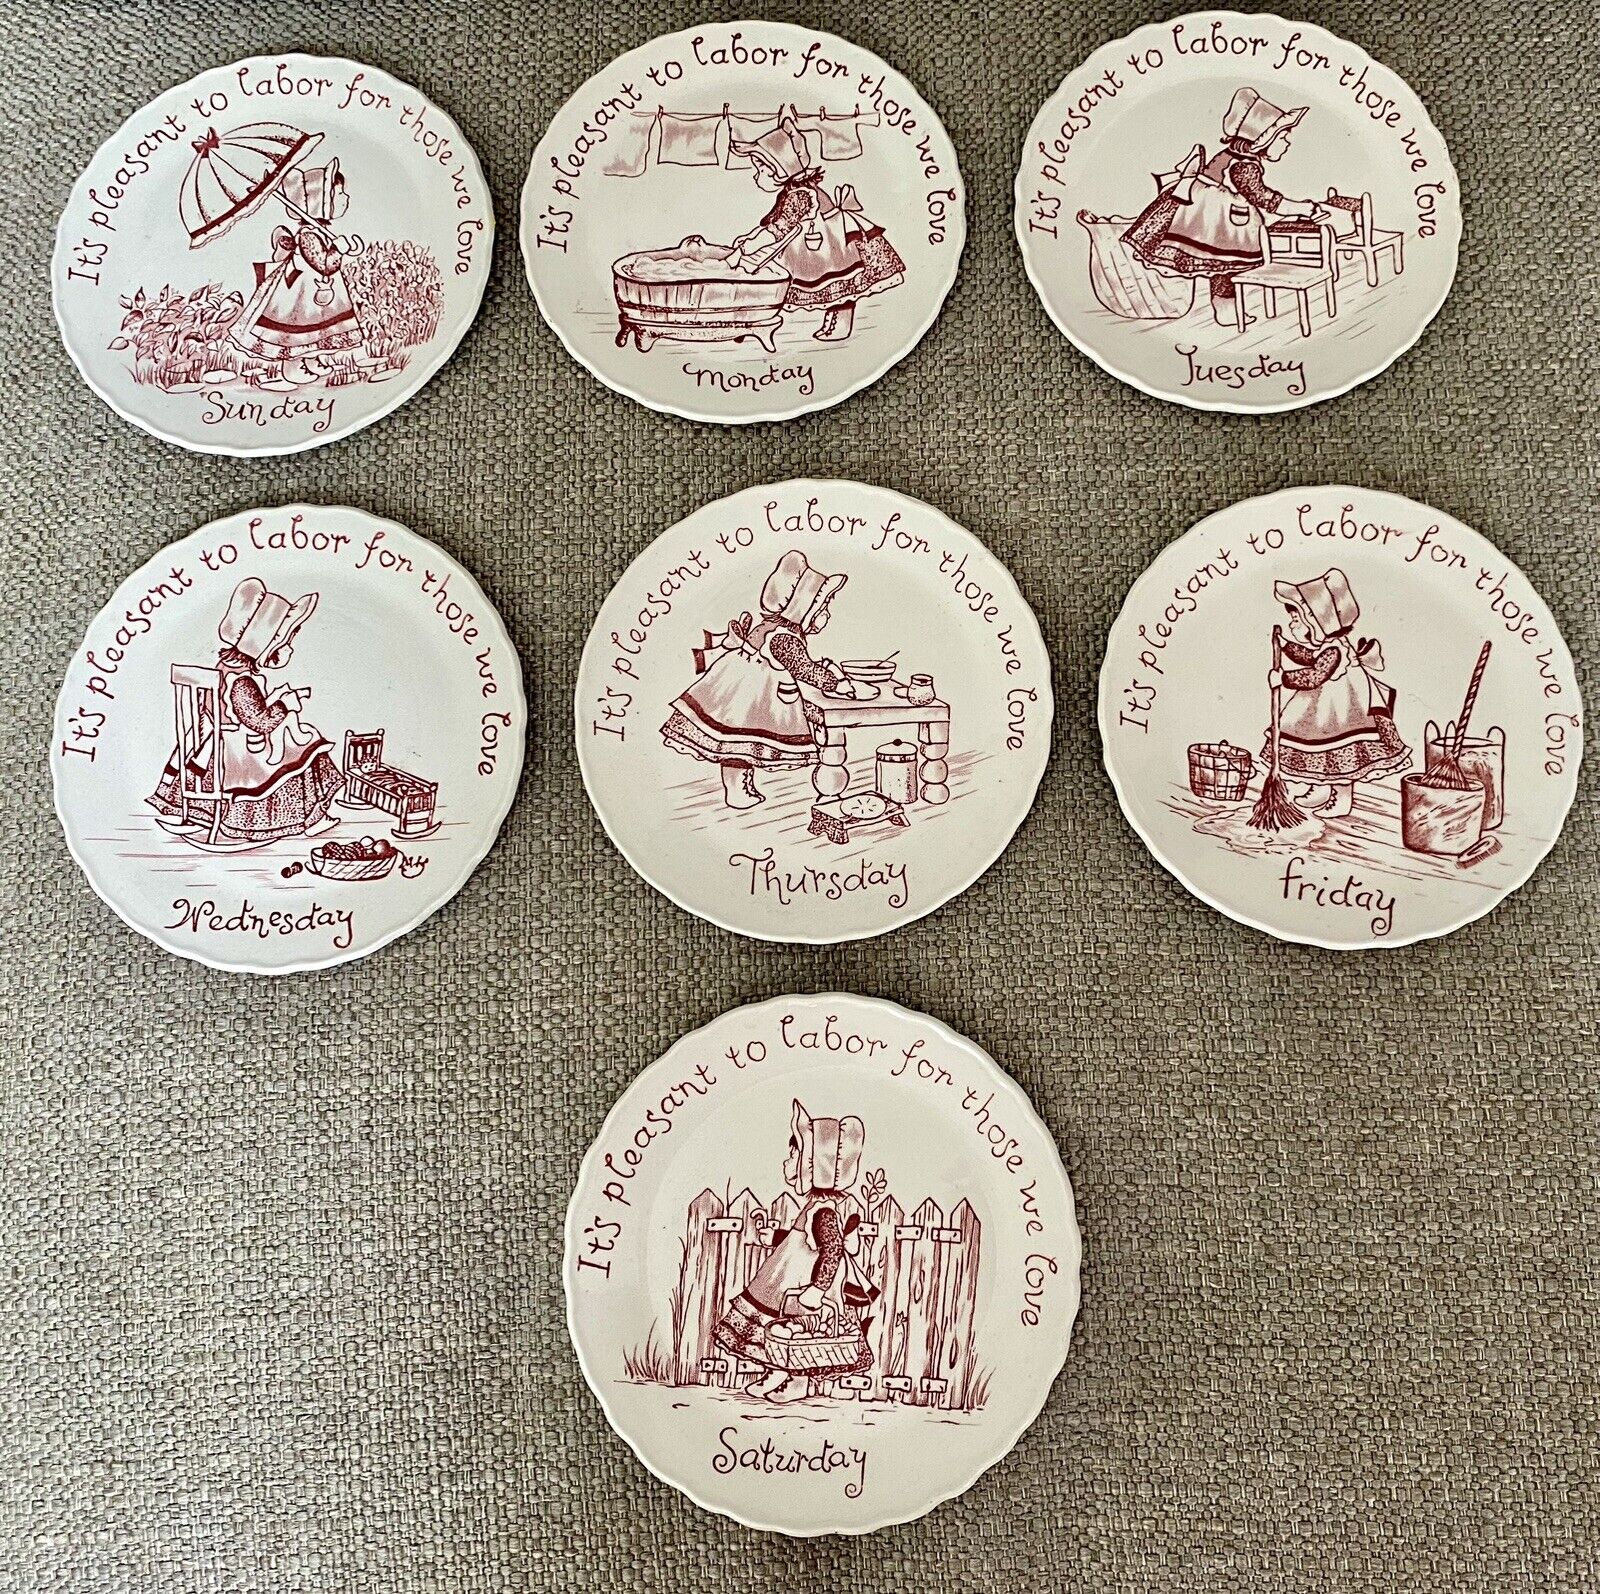 7 Days Of The Week Plates, Crownford Bone China. England